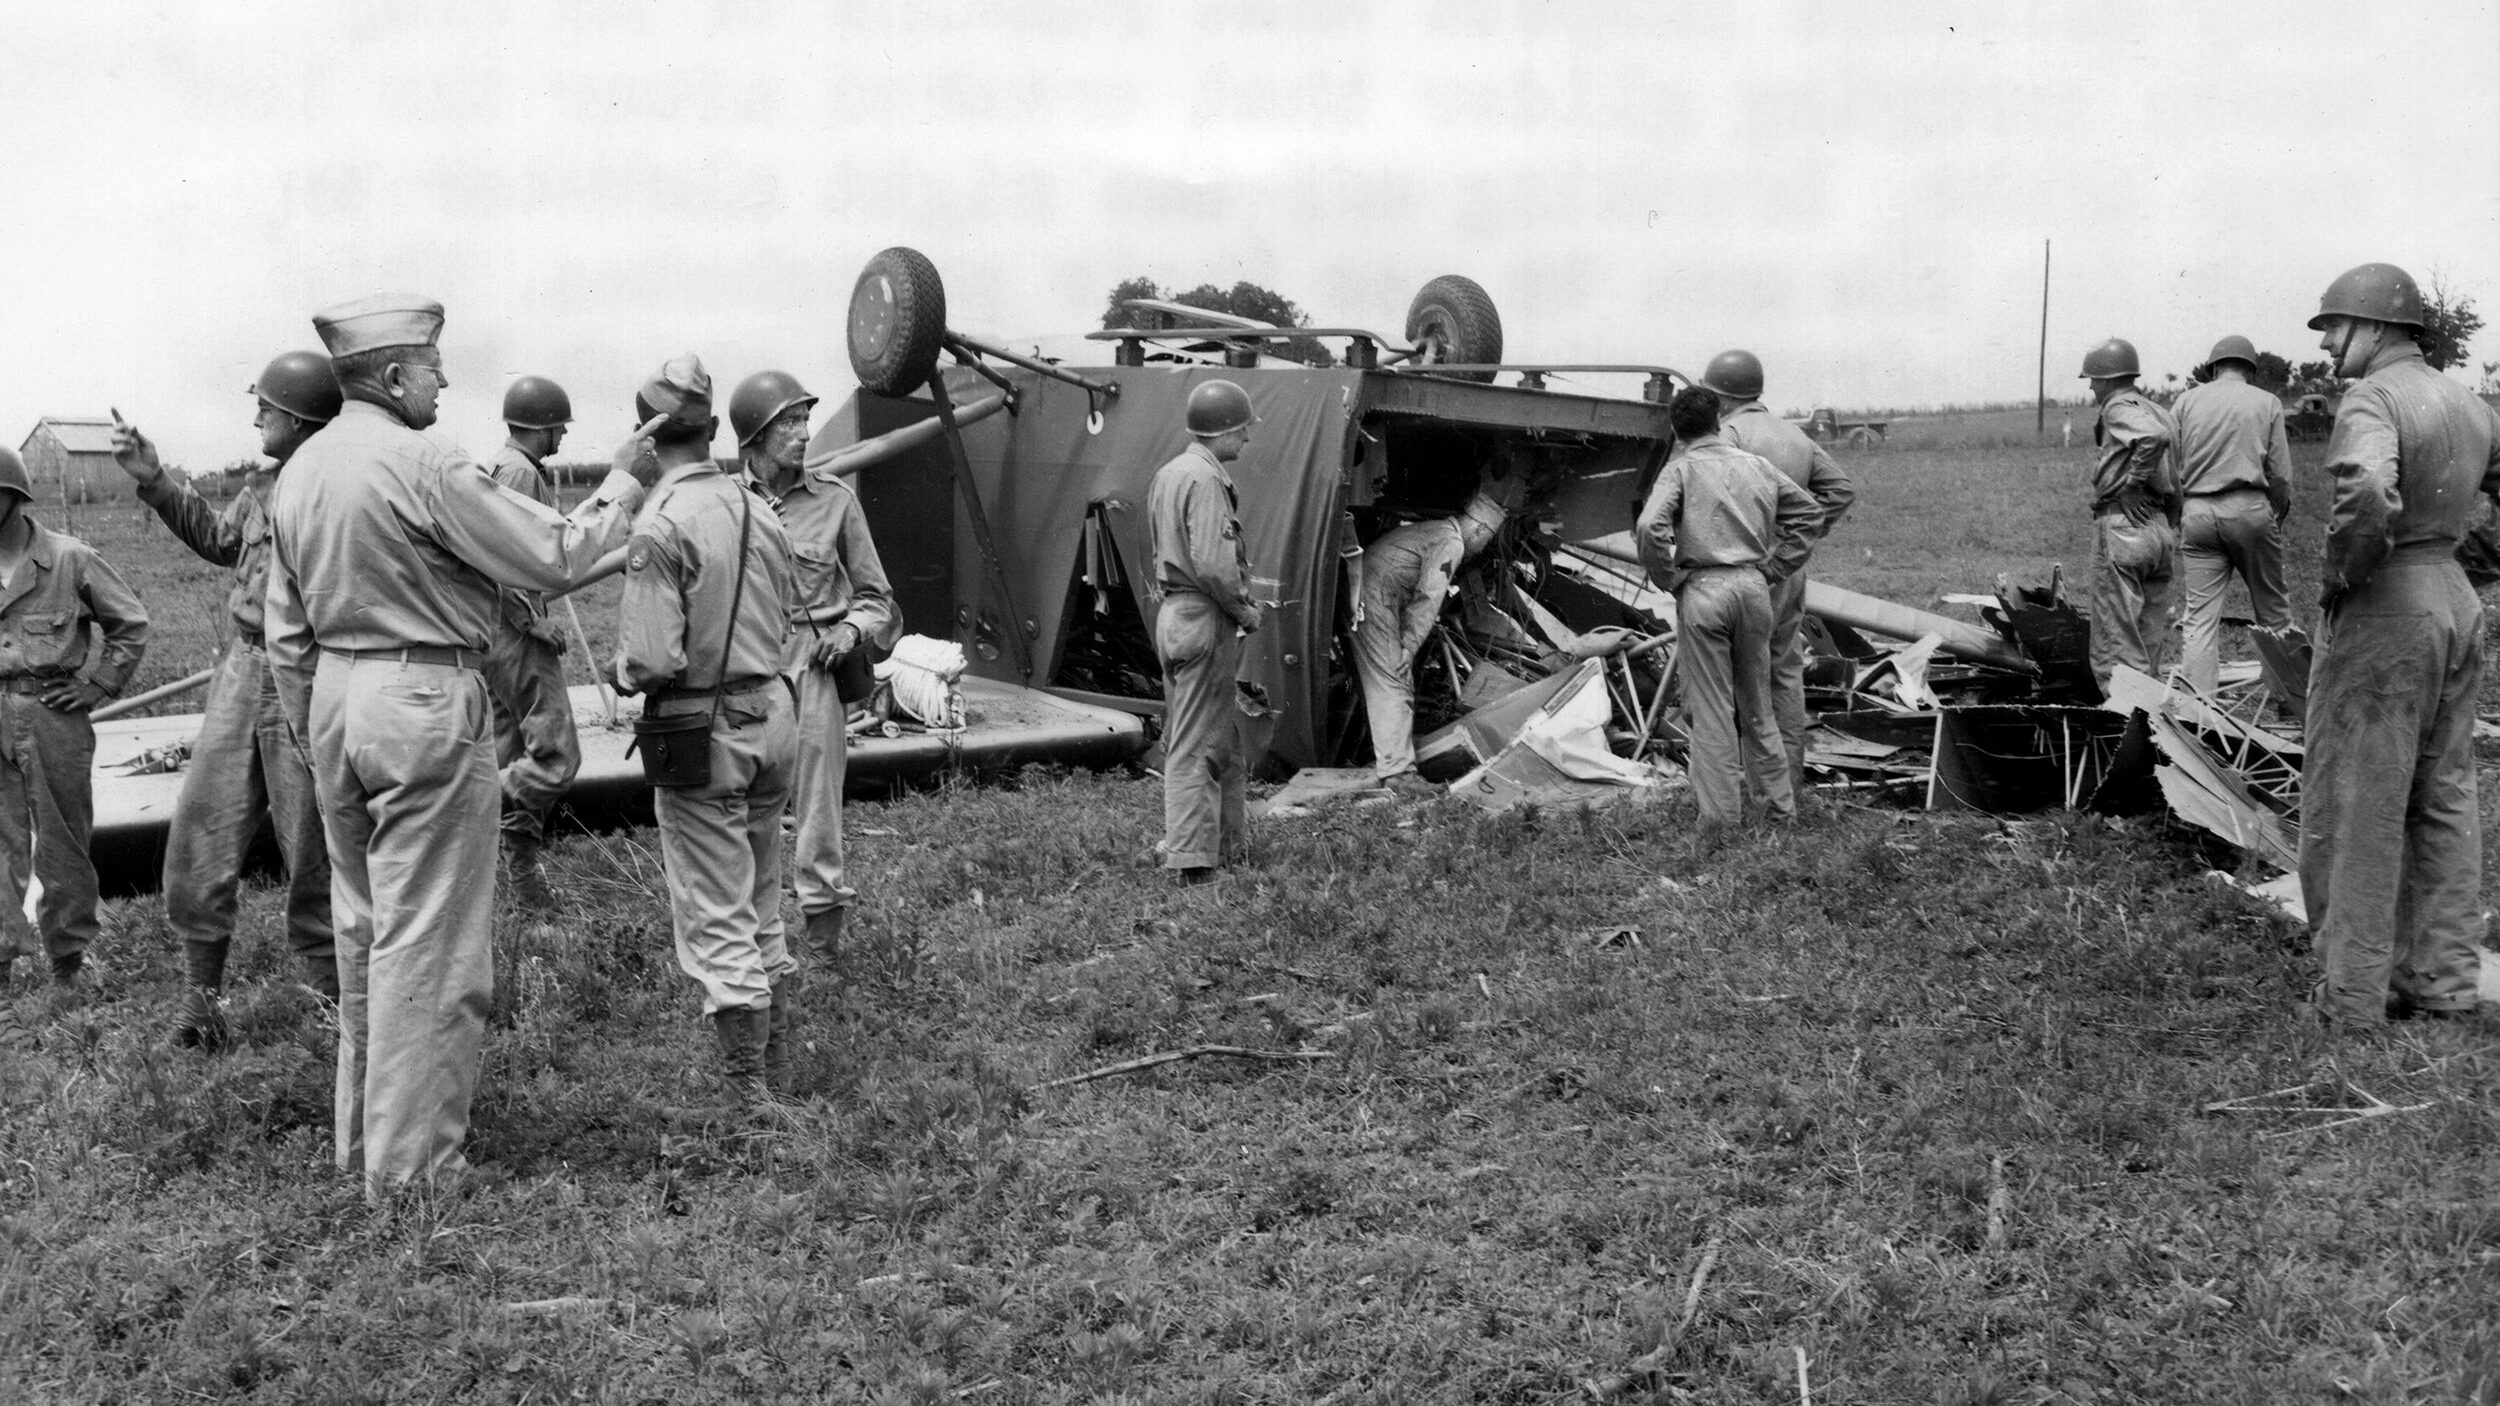 Officers inspect the wreckage of a 101st Airborne glider that flipped upon landing during training in Tennessee, June 1943. The men inside reportedly parachuted to safety.